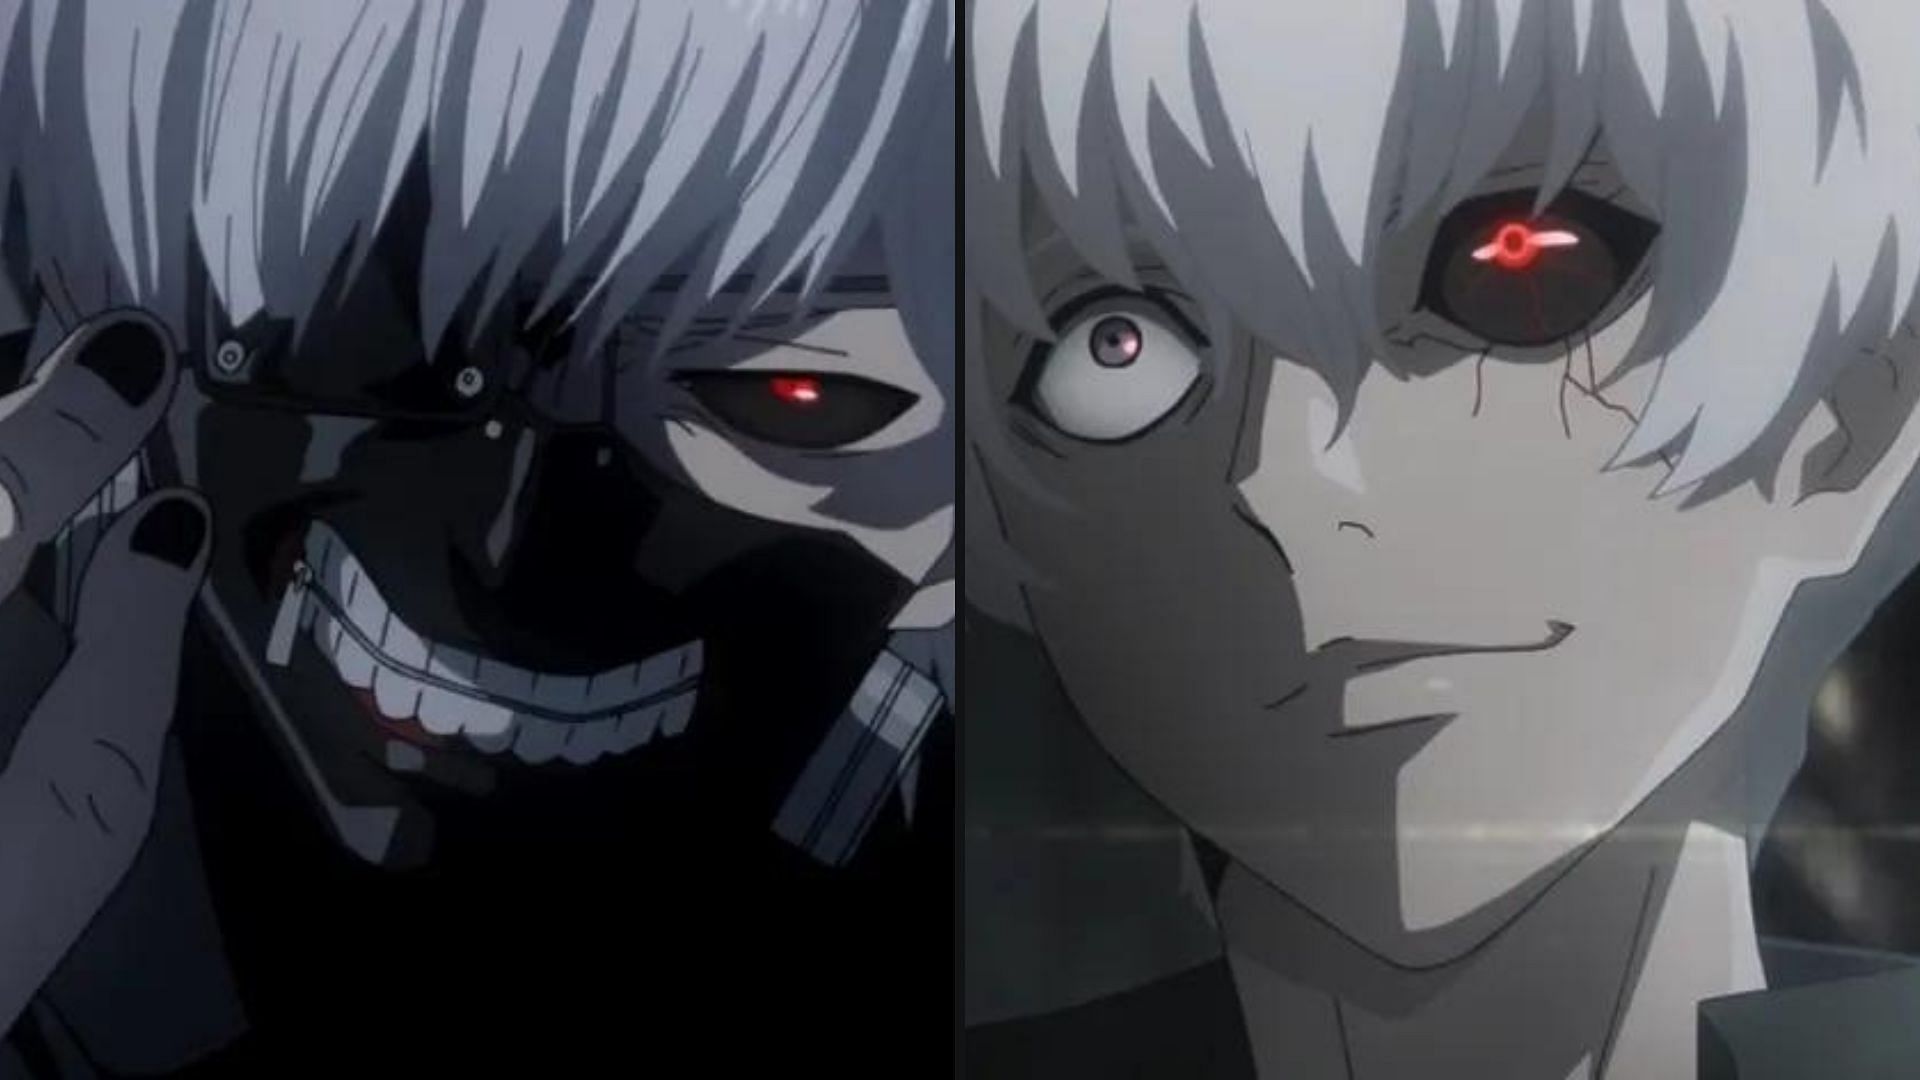 Tokyo Ghoul: 4 Reasons Why The Anime's Changes Were Good Ideas